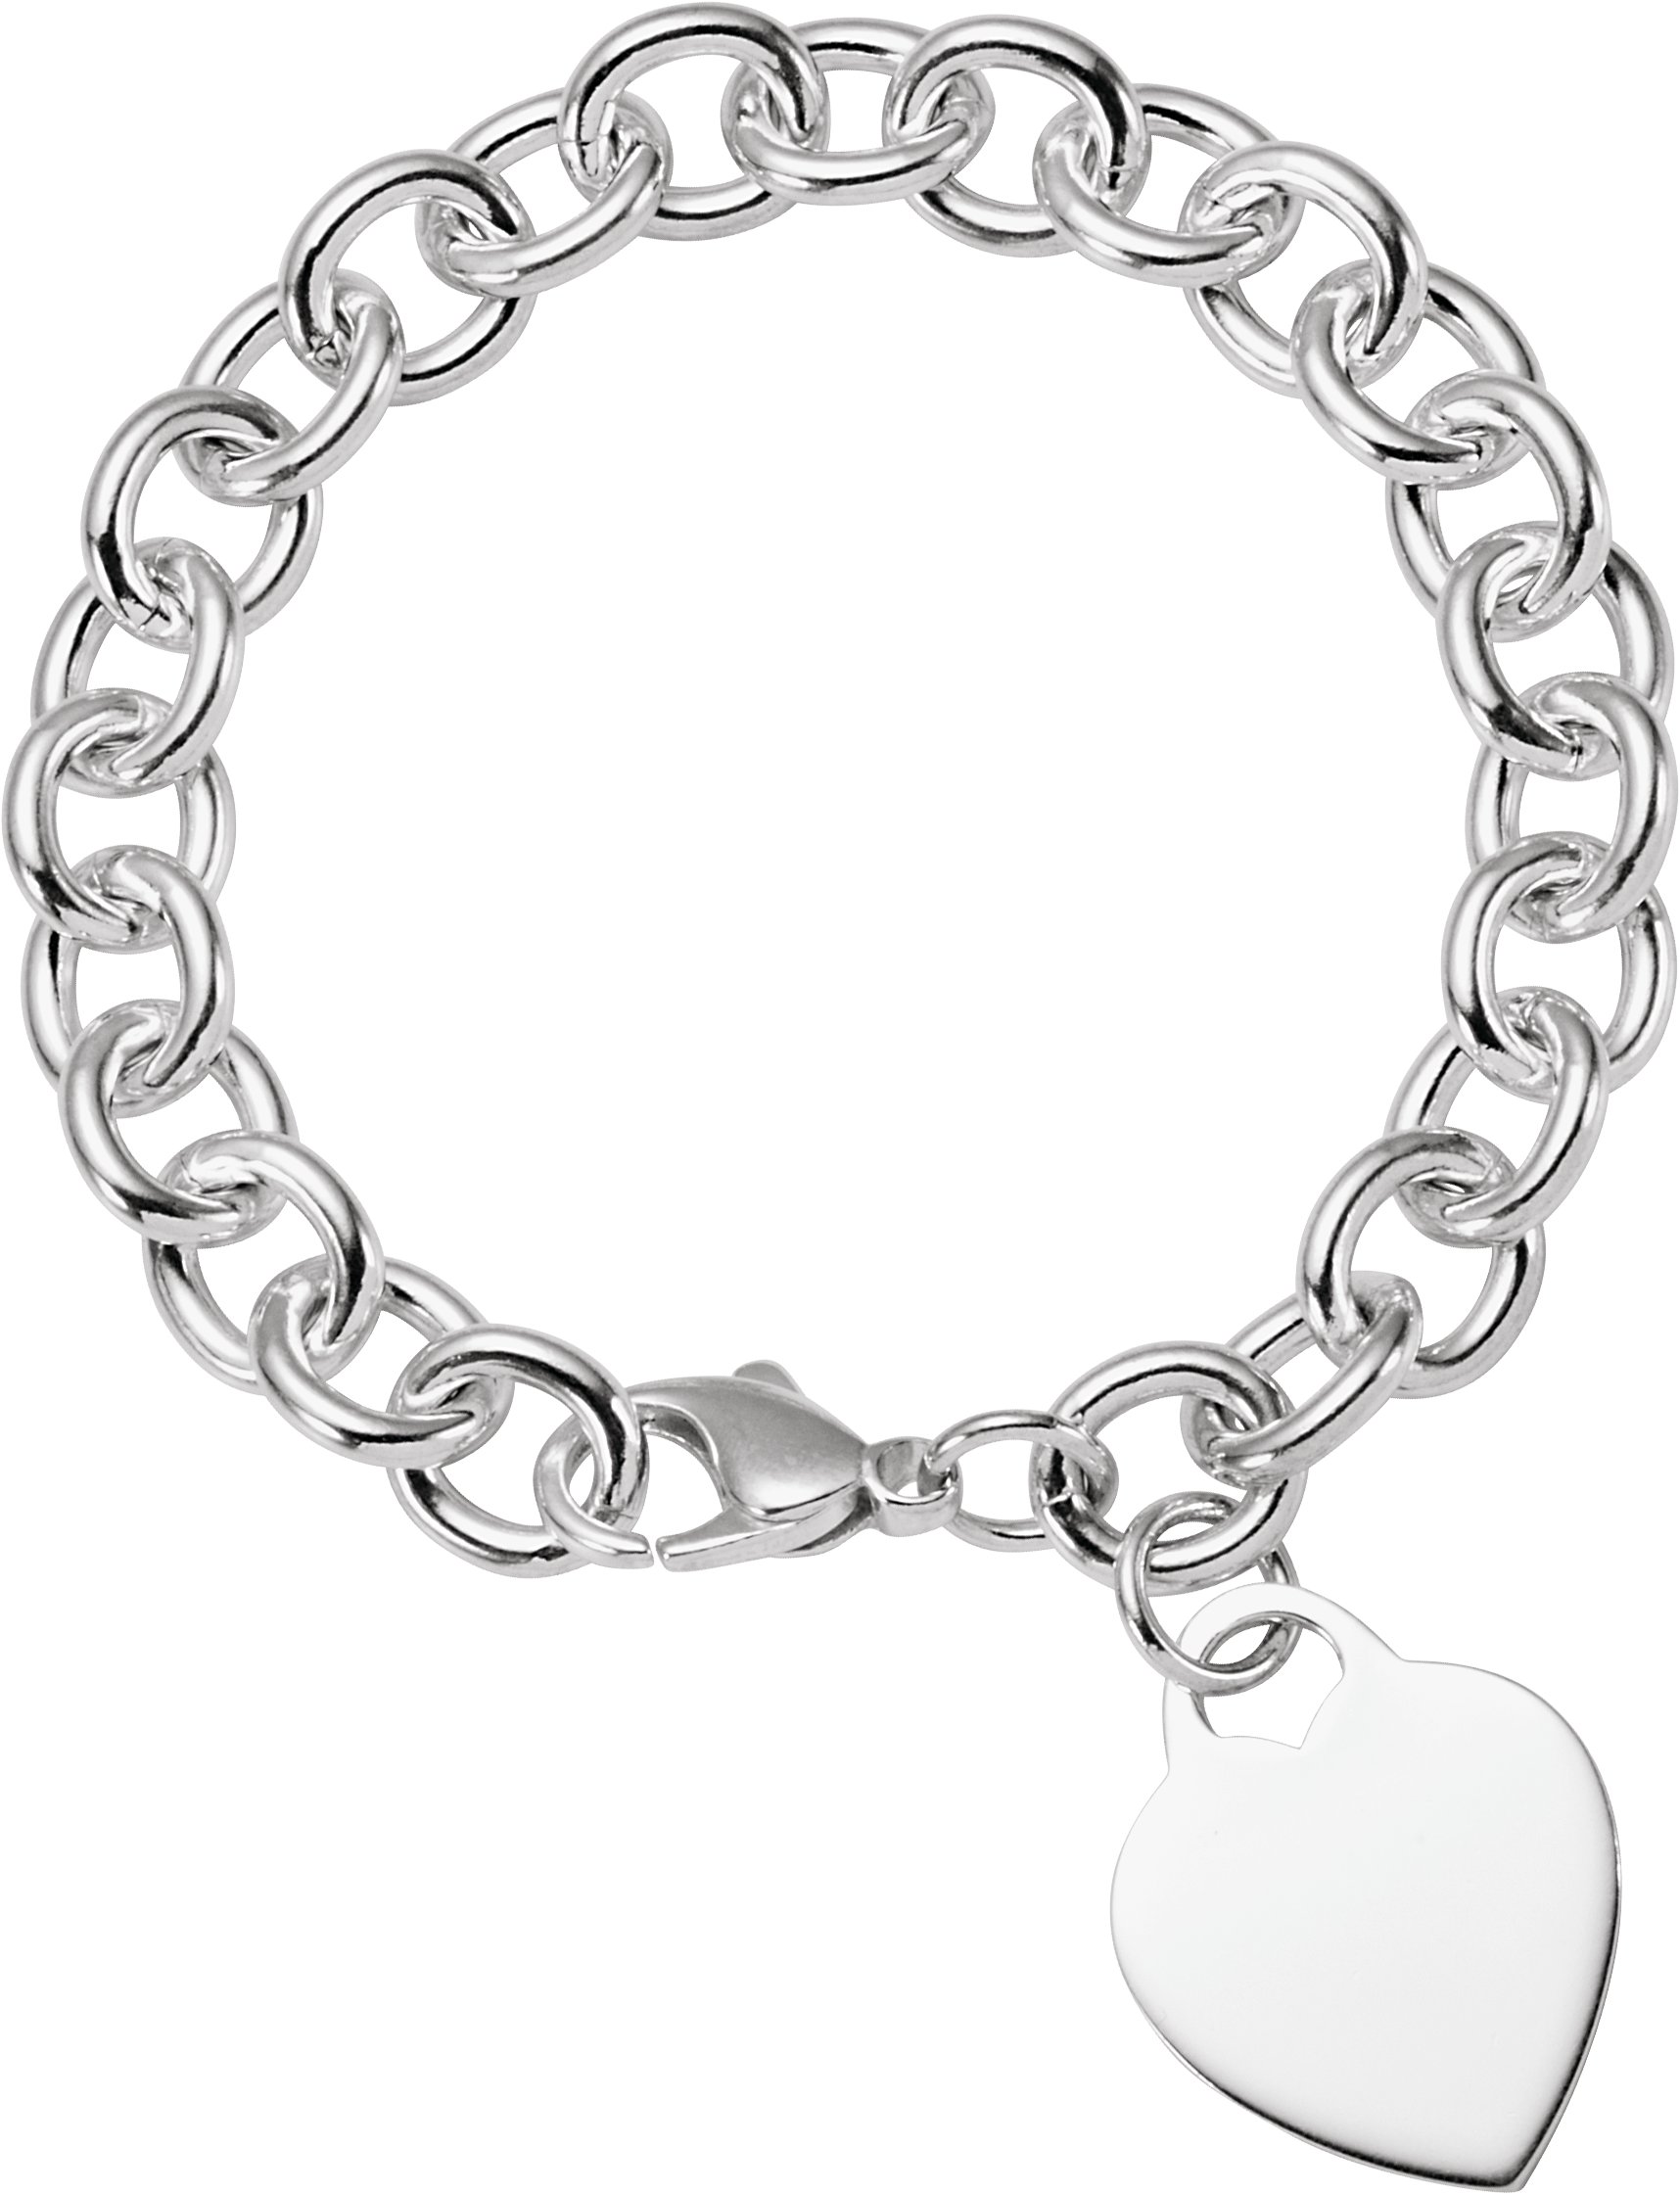 9.75mm Sterling Silver Cable Bracelet with Heart Charm 7.5 inch Ref 571498